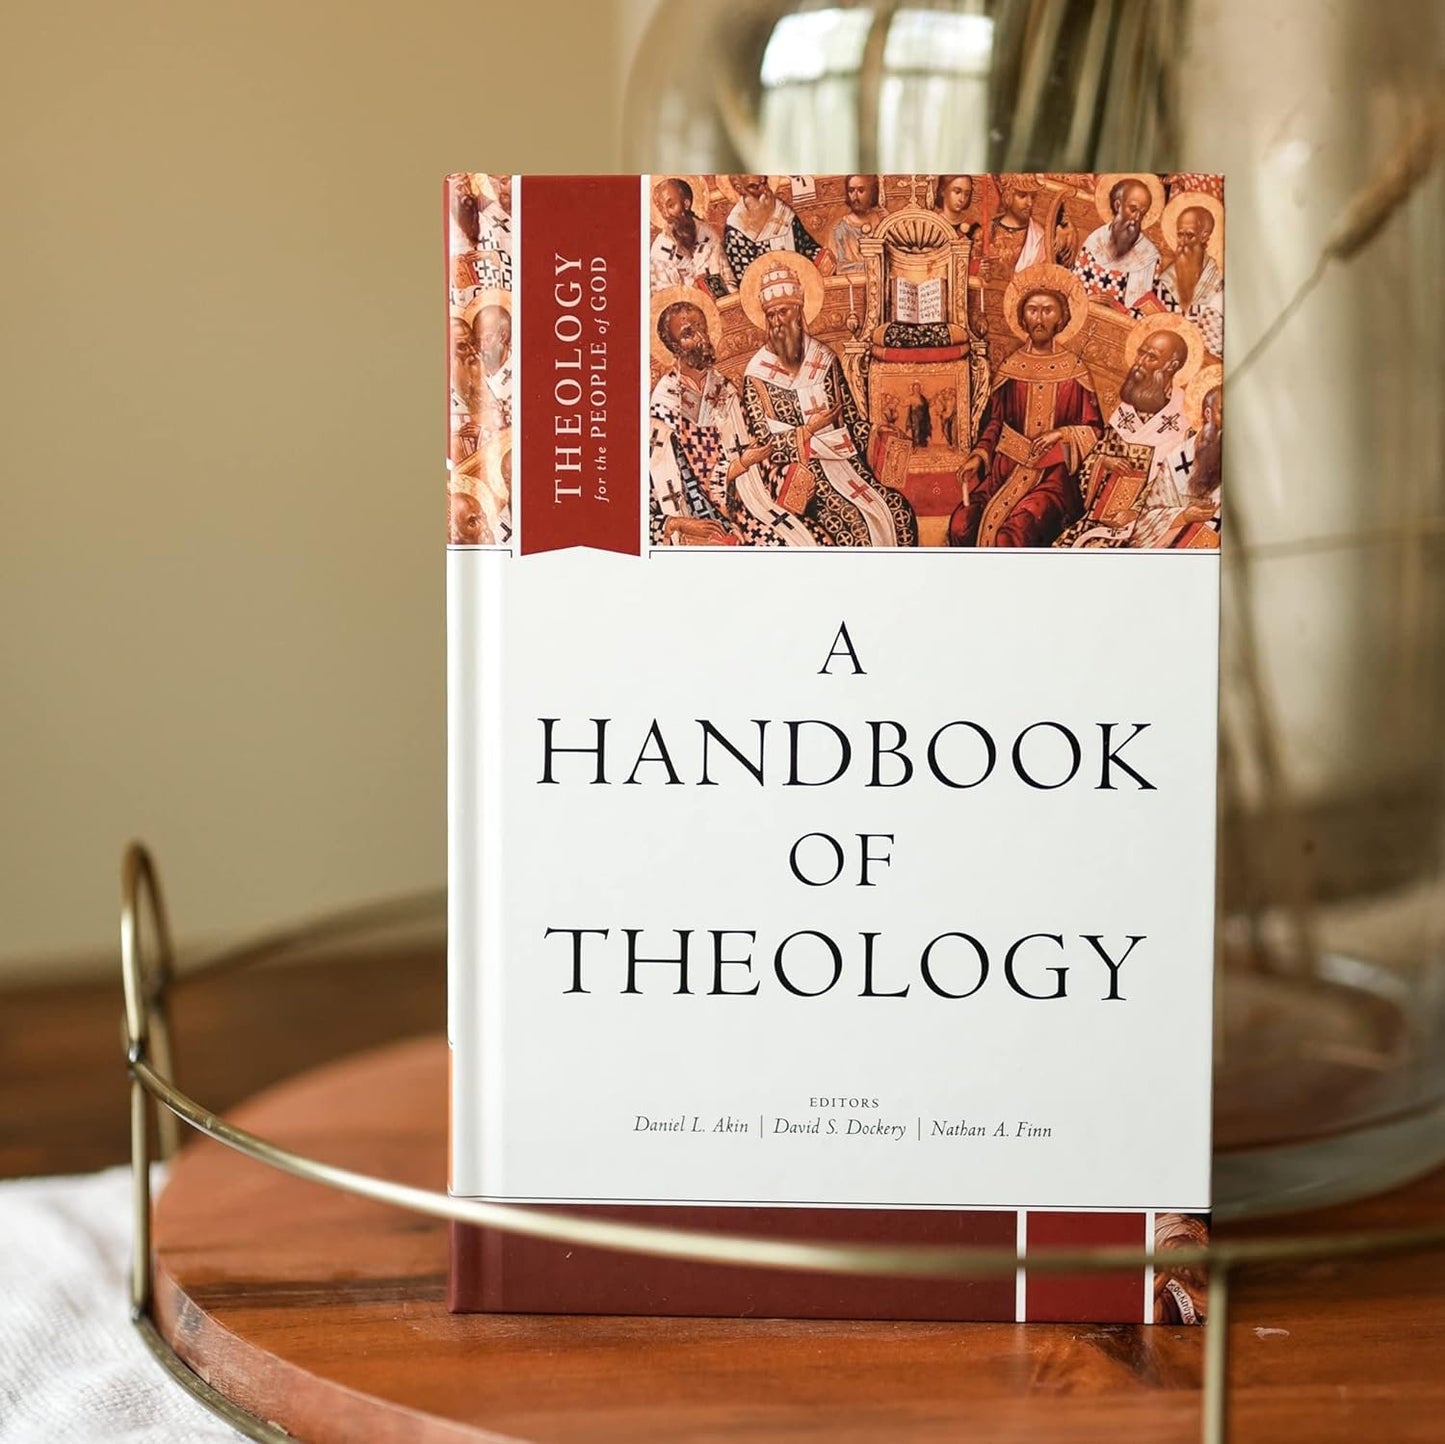 A Handbook of Theology (Theology for the People of God)